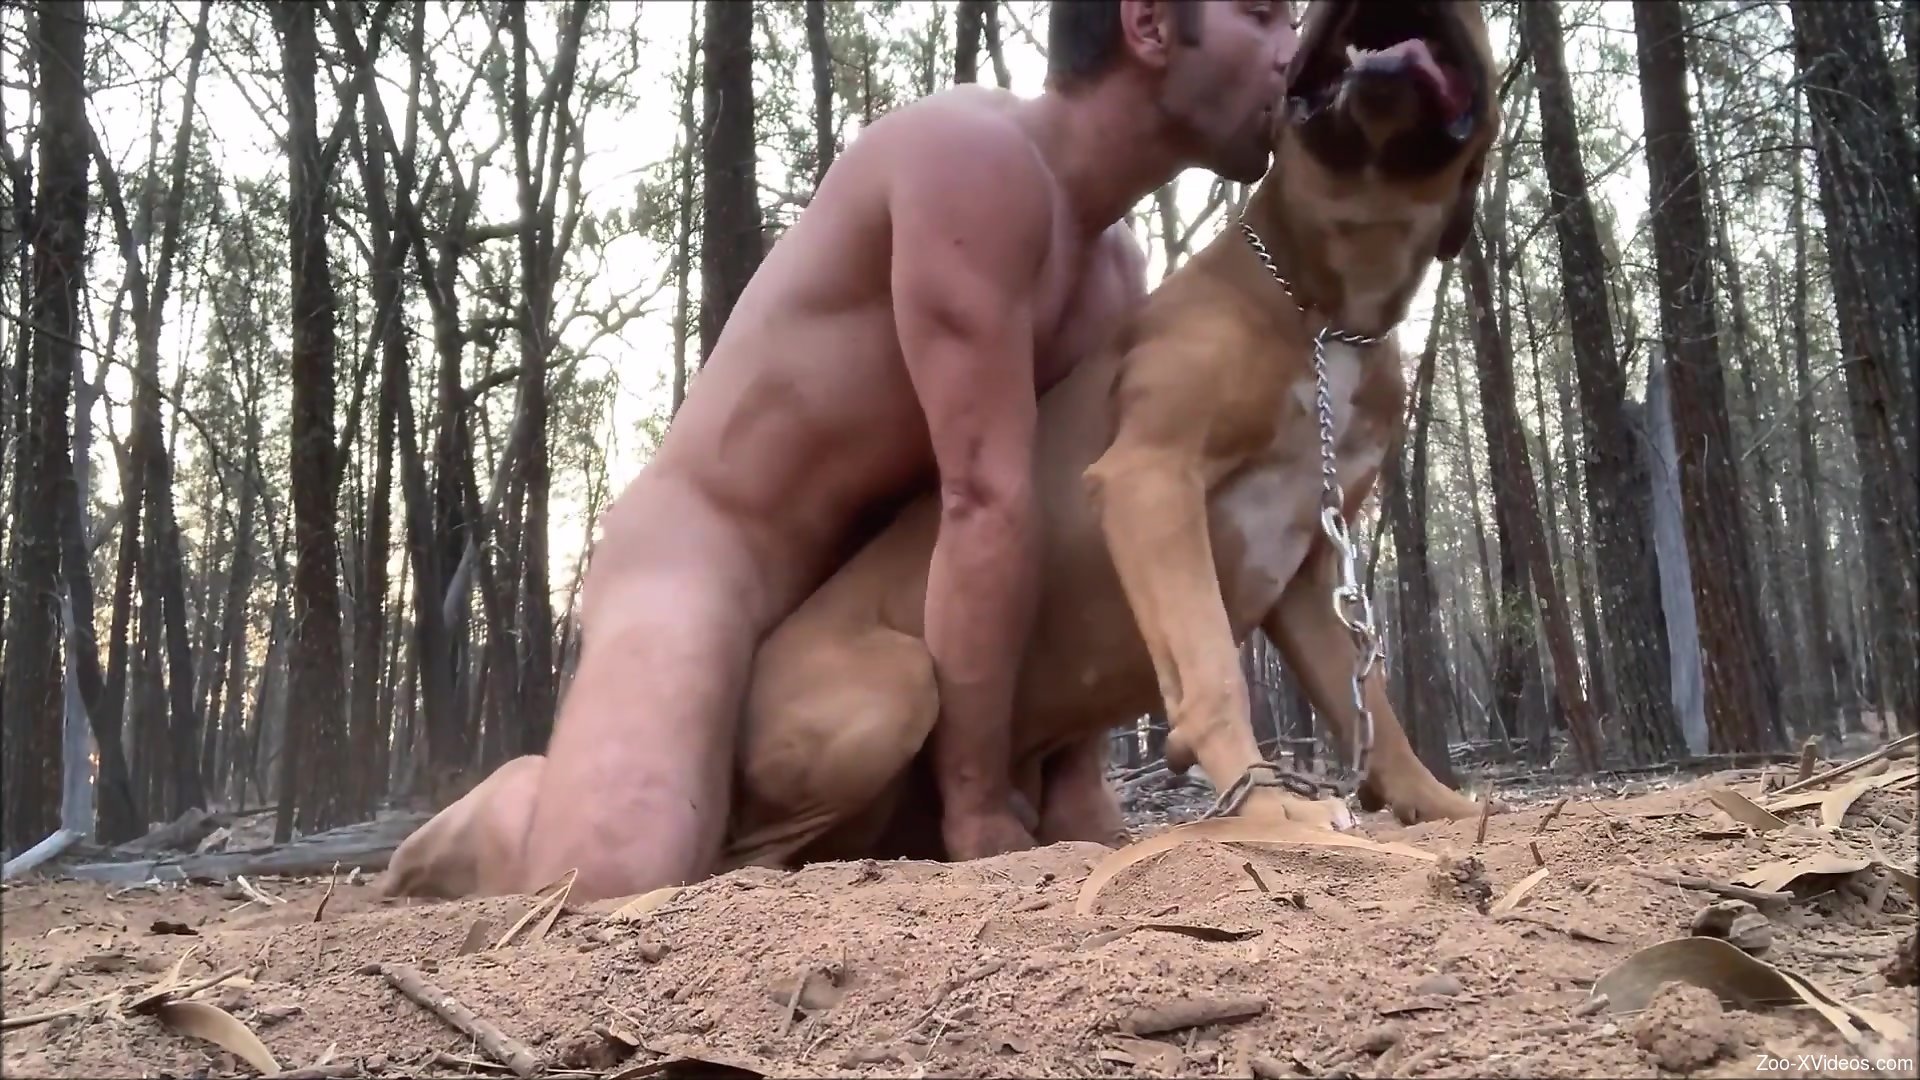 Dog Xxx Dies Video - Shredded guy fucking a sexy brown animal in the woods